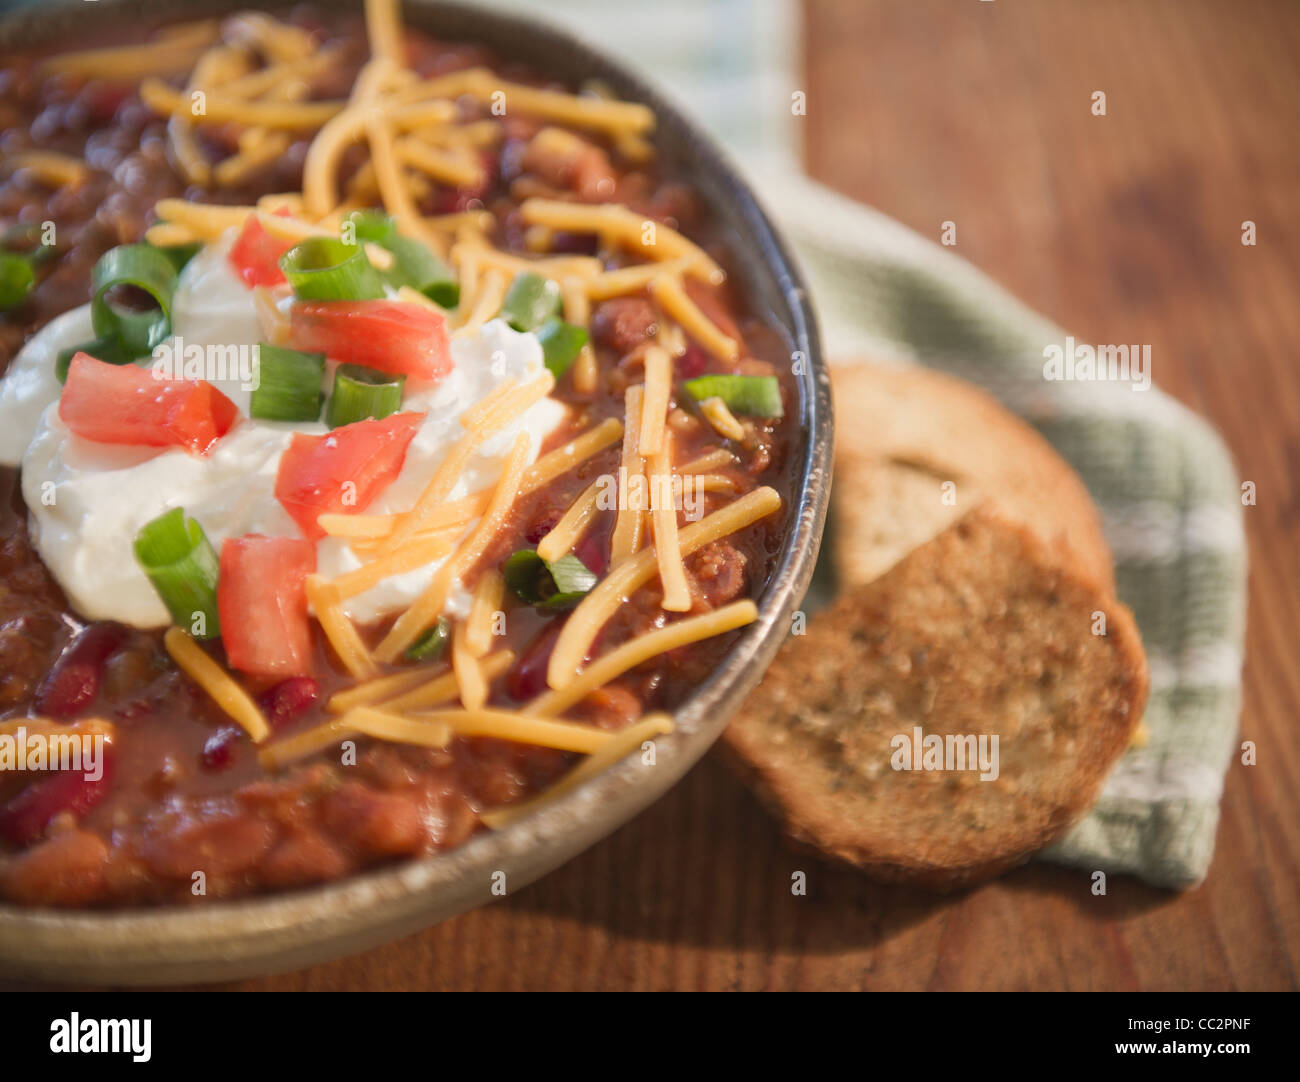 USA, New Jersey, Jersey City, Close up of stew with chili Stock Photo